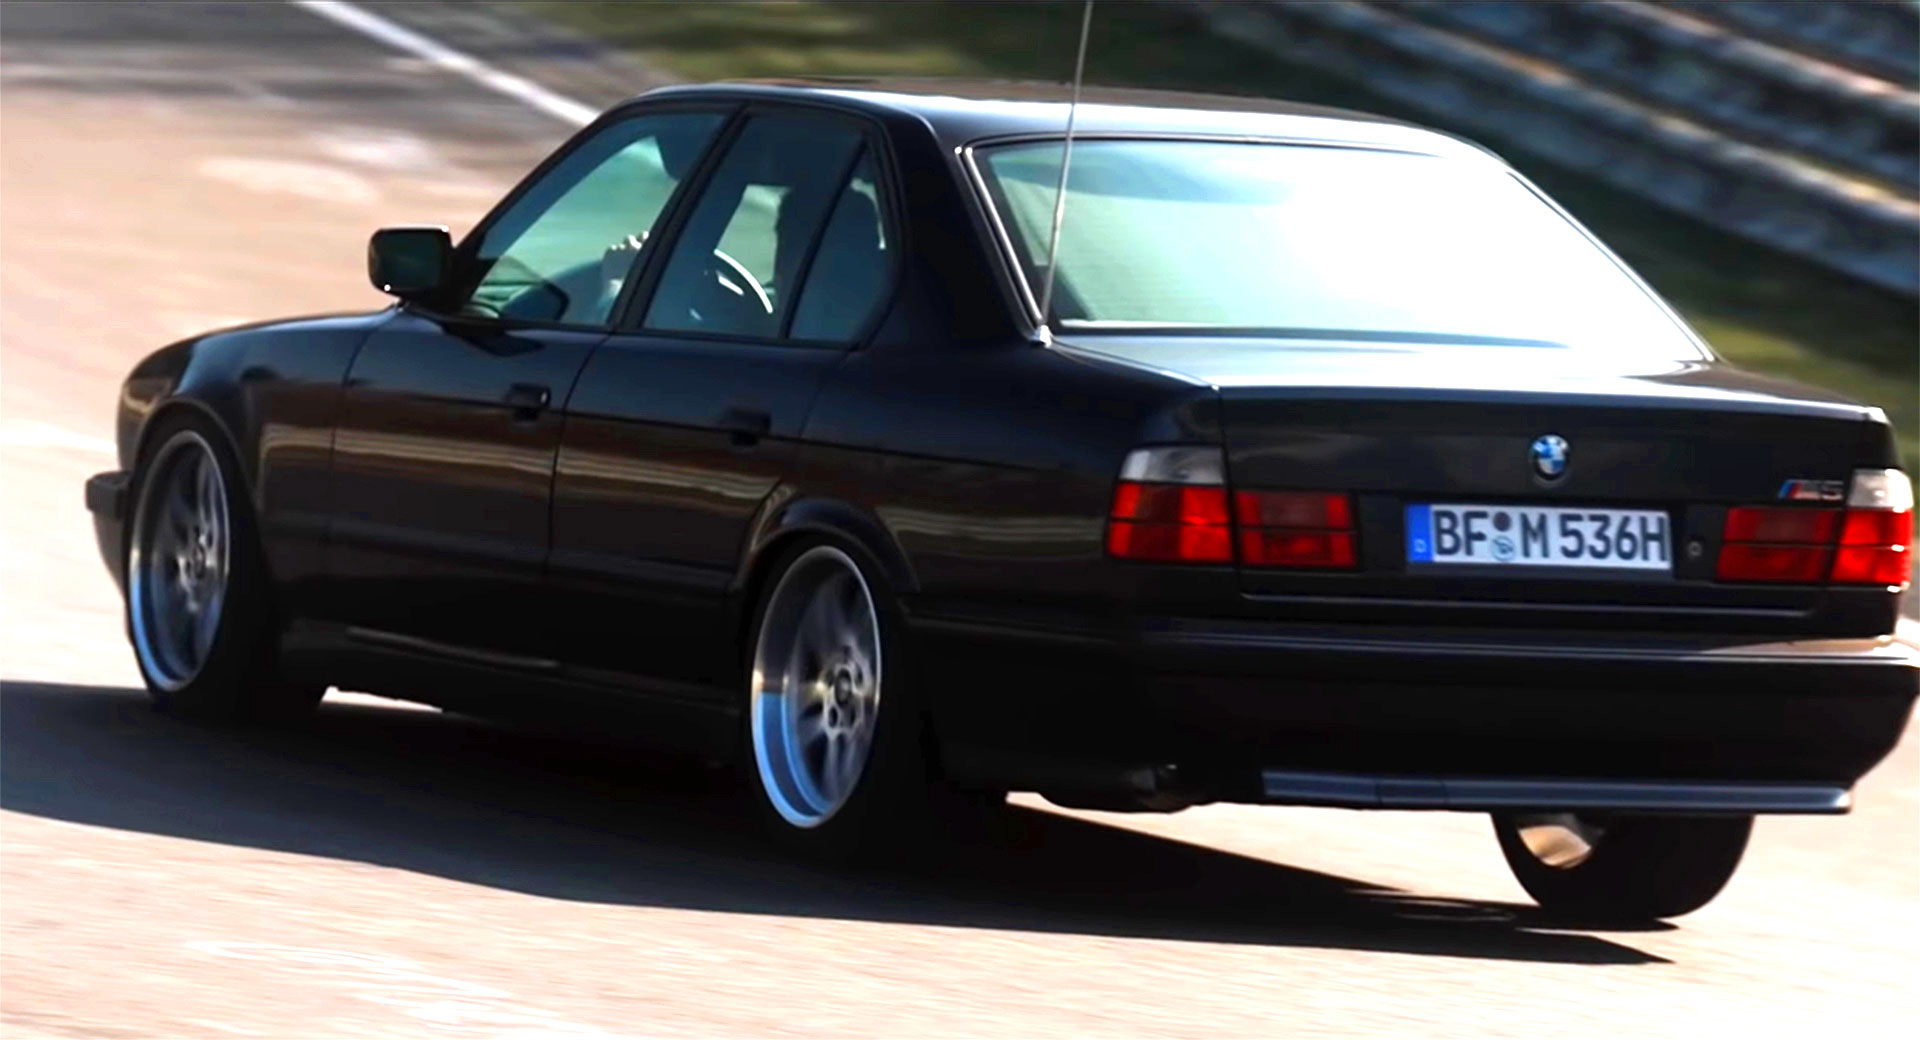 https://www.carscoops.com/wp-content/uploads/2022/05/BMW-M5-Nurburgring-E34-1990-1.jpg